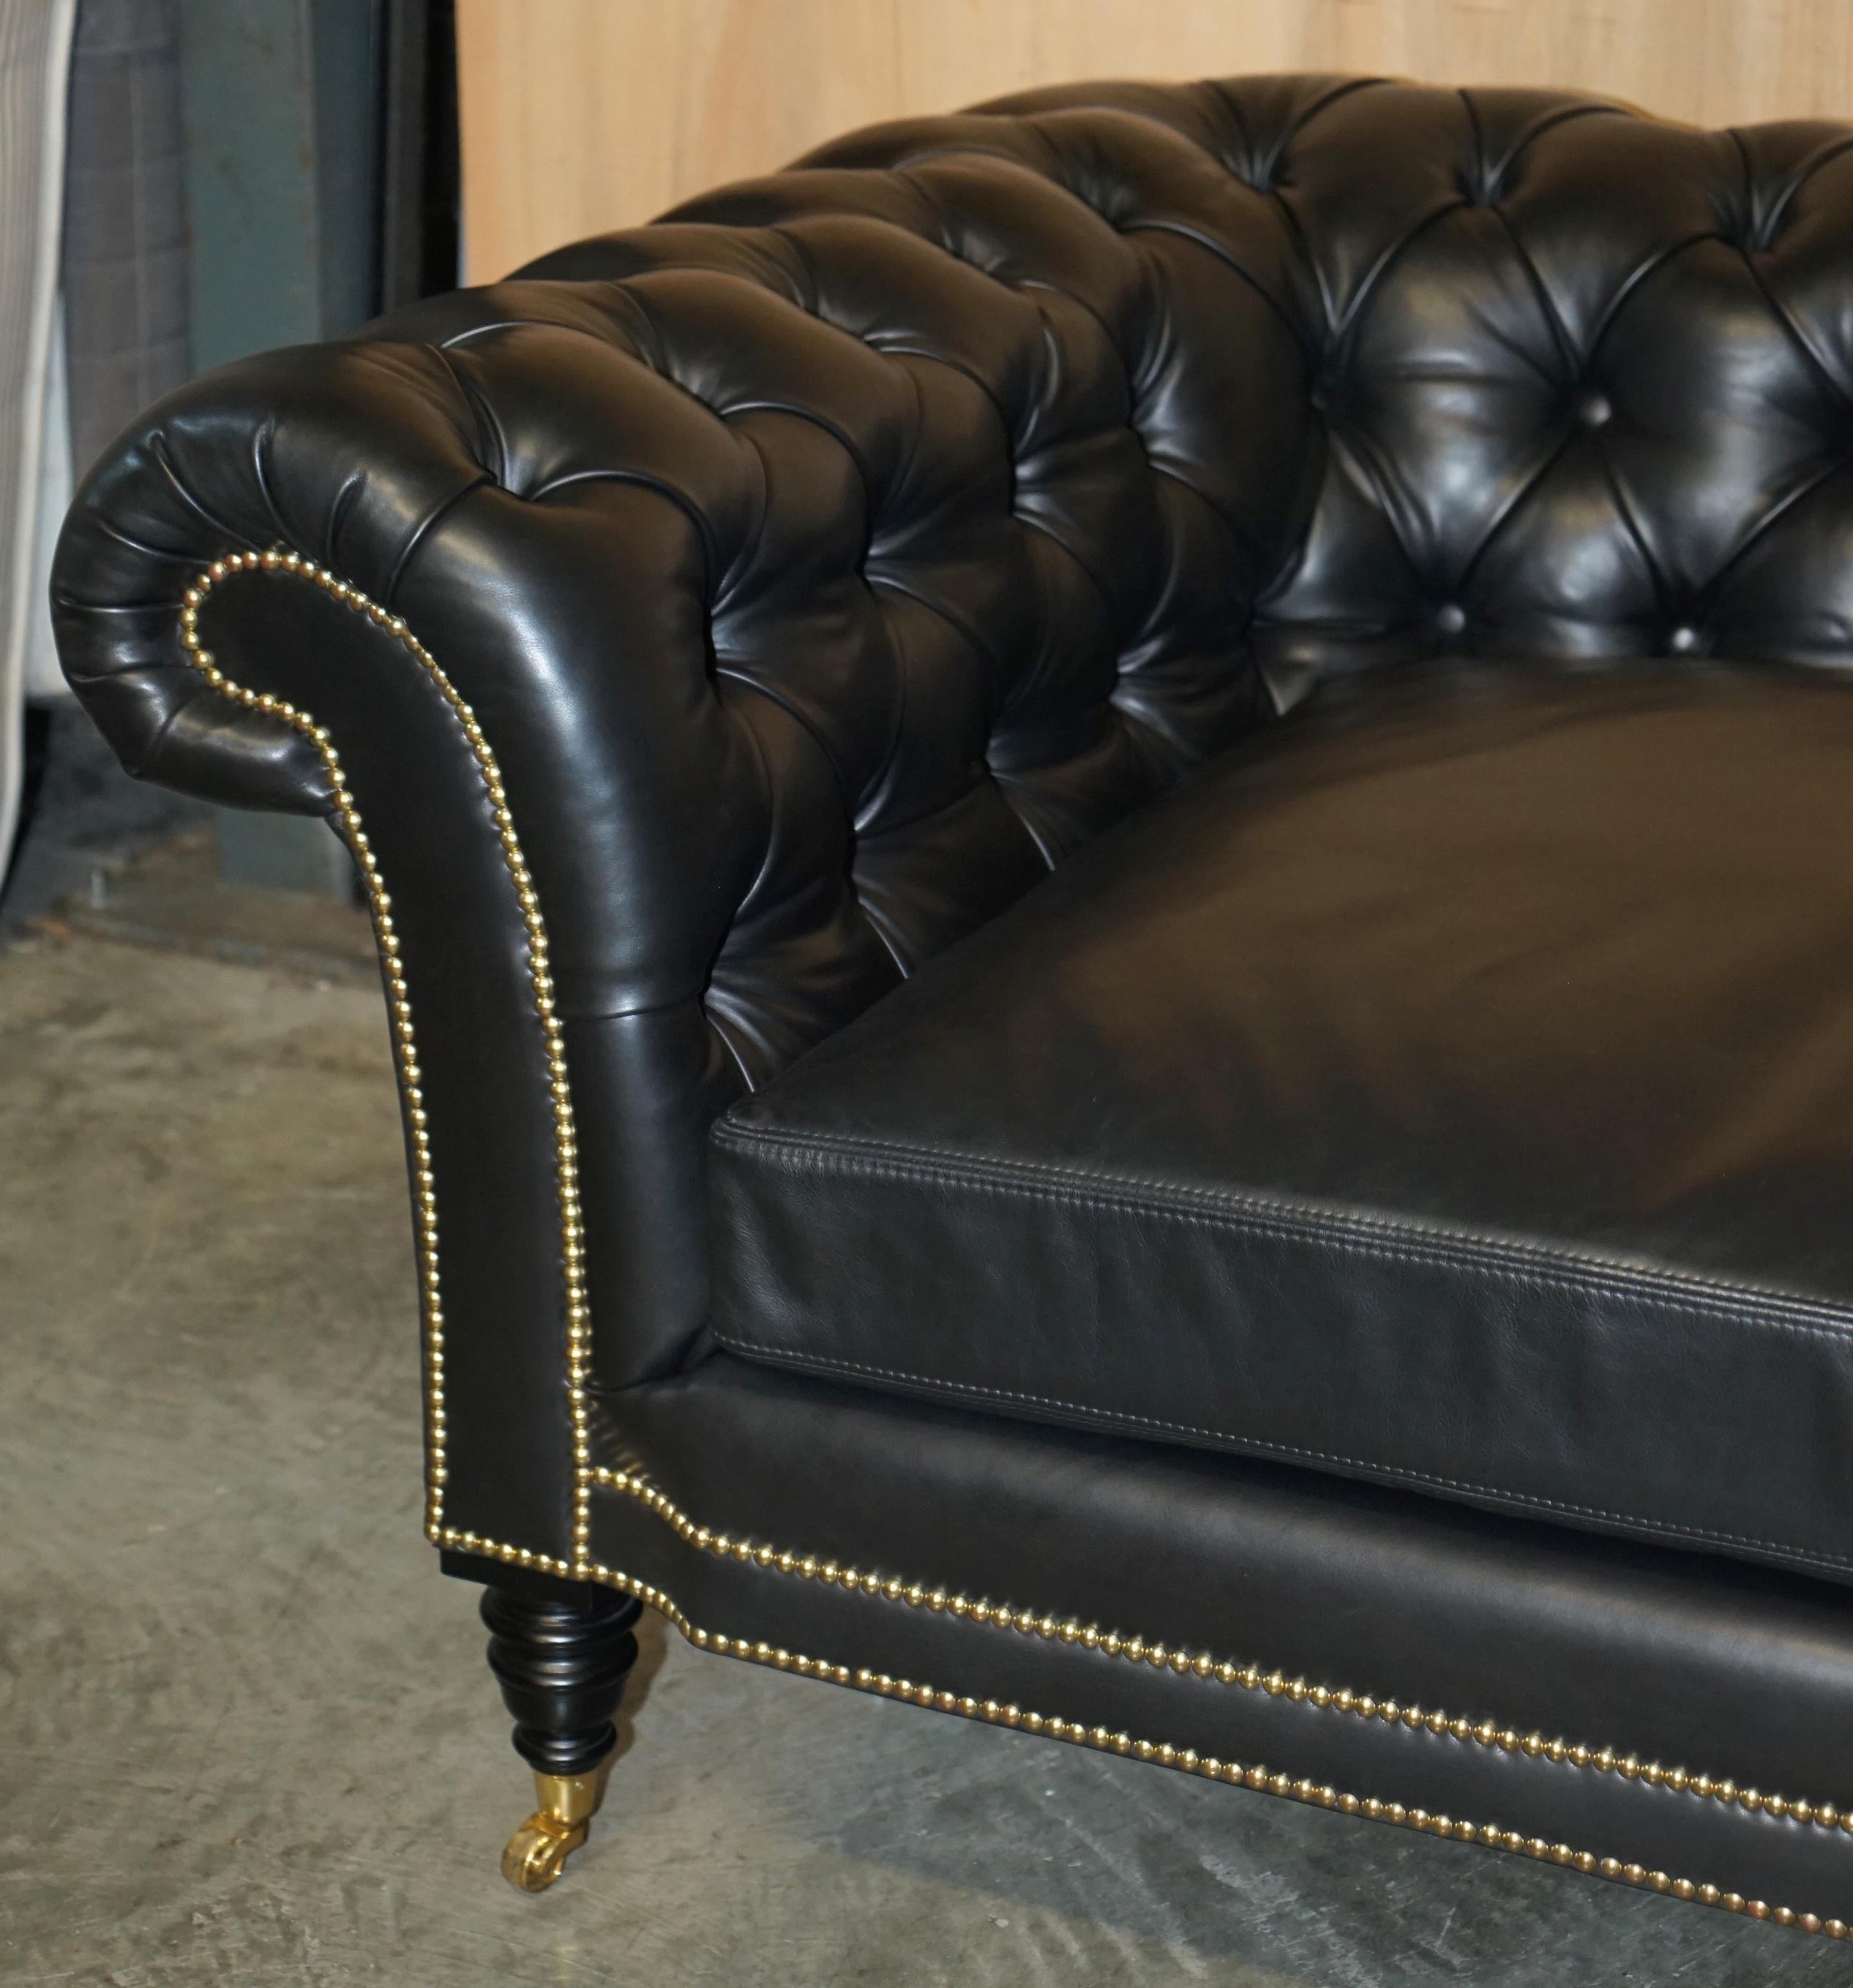 EXQUISITE PAIR OF RALPH LAUREN BROOK STREET BLACK LEATHER CHESTERFIELD SOFAs For Sale 5